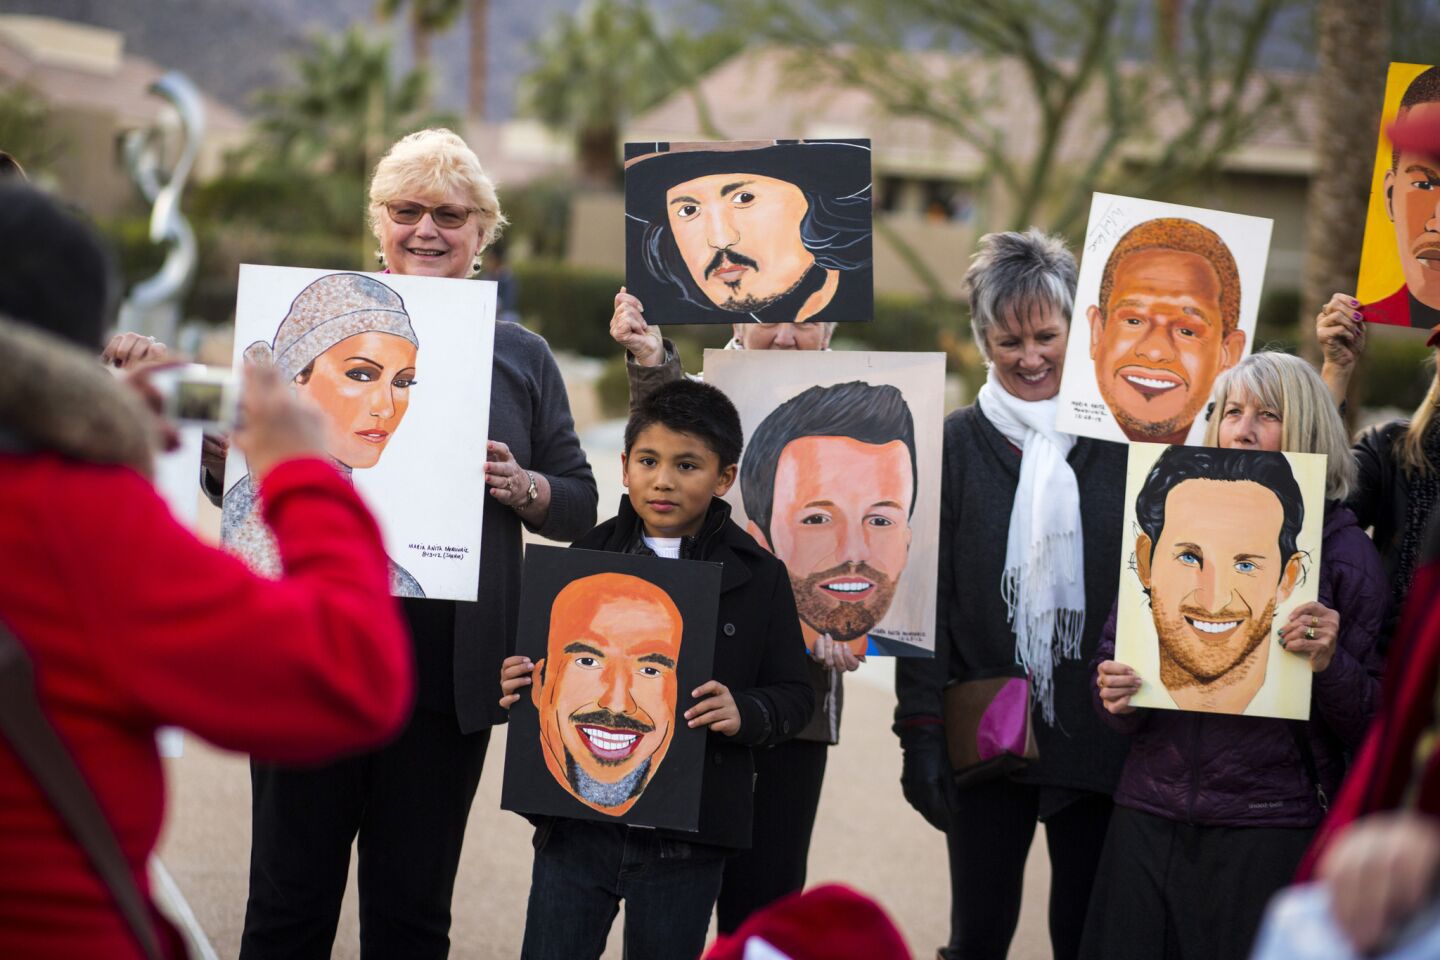 San Antonio artist Maria Anita, left, takes pictures of movie fans holding her celebrity paintings outside the Palm Springs Convention Center.